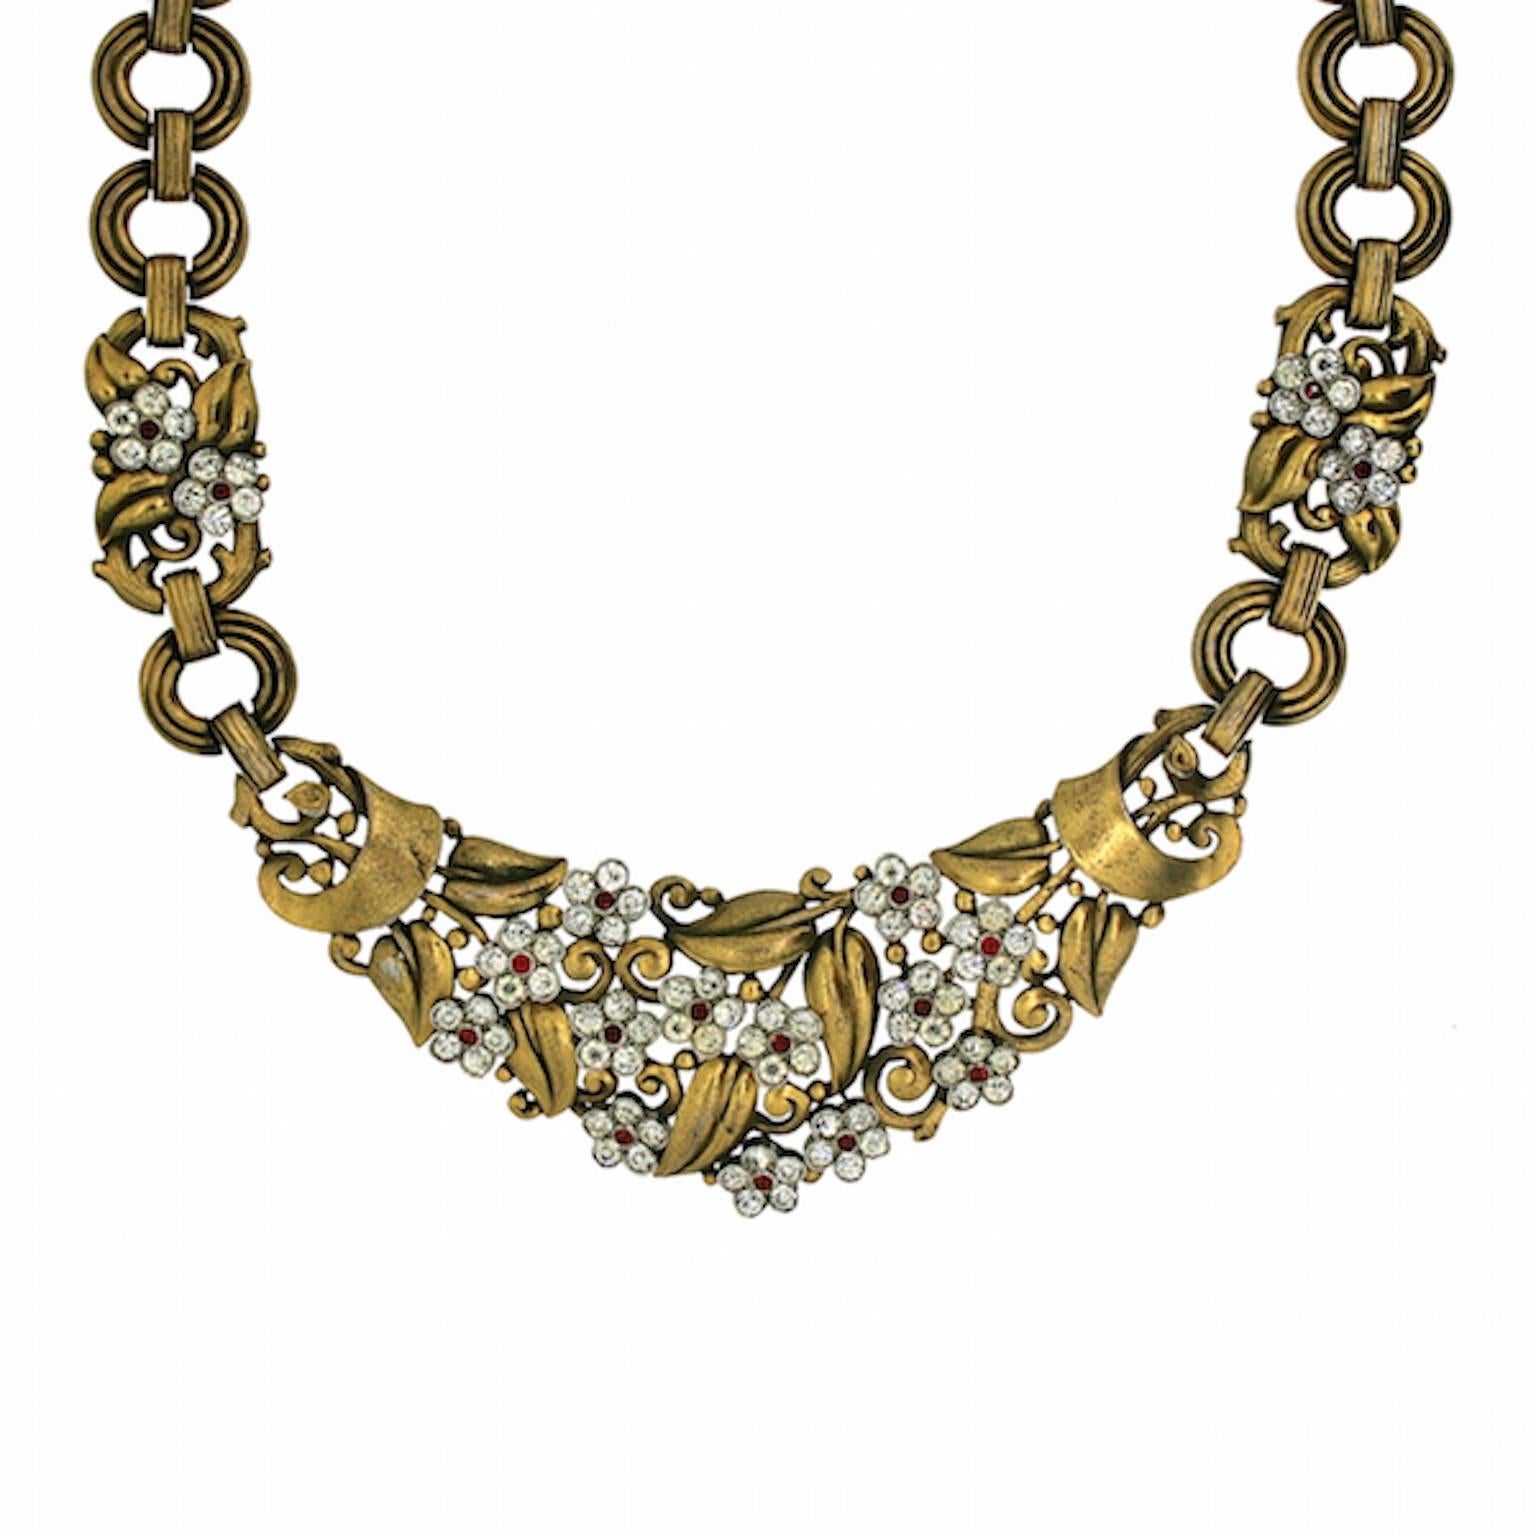 This necklace is a perfect example of Trifari's creative rhinestone design and craftsmanship. It was made by the American company in the 1940s.
Condition Report:
Very Good - Minor wear to the gilt metal consistent with age and use. This is only